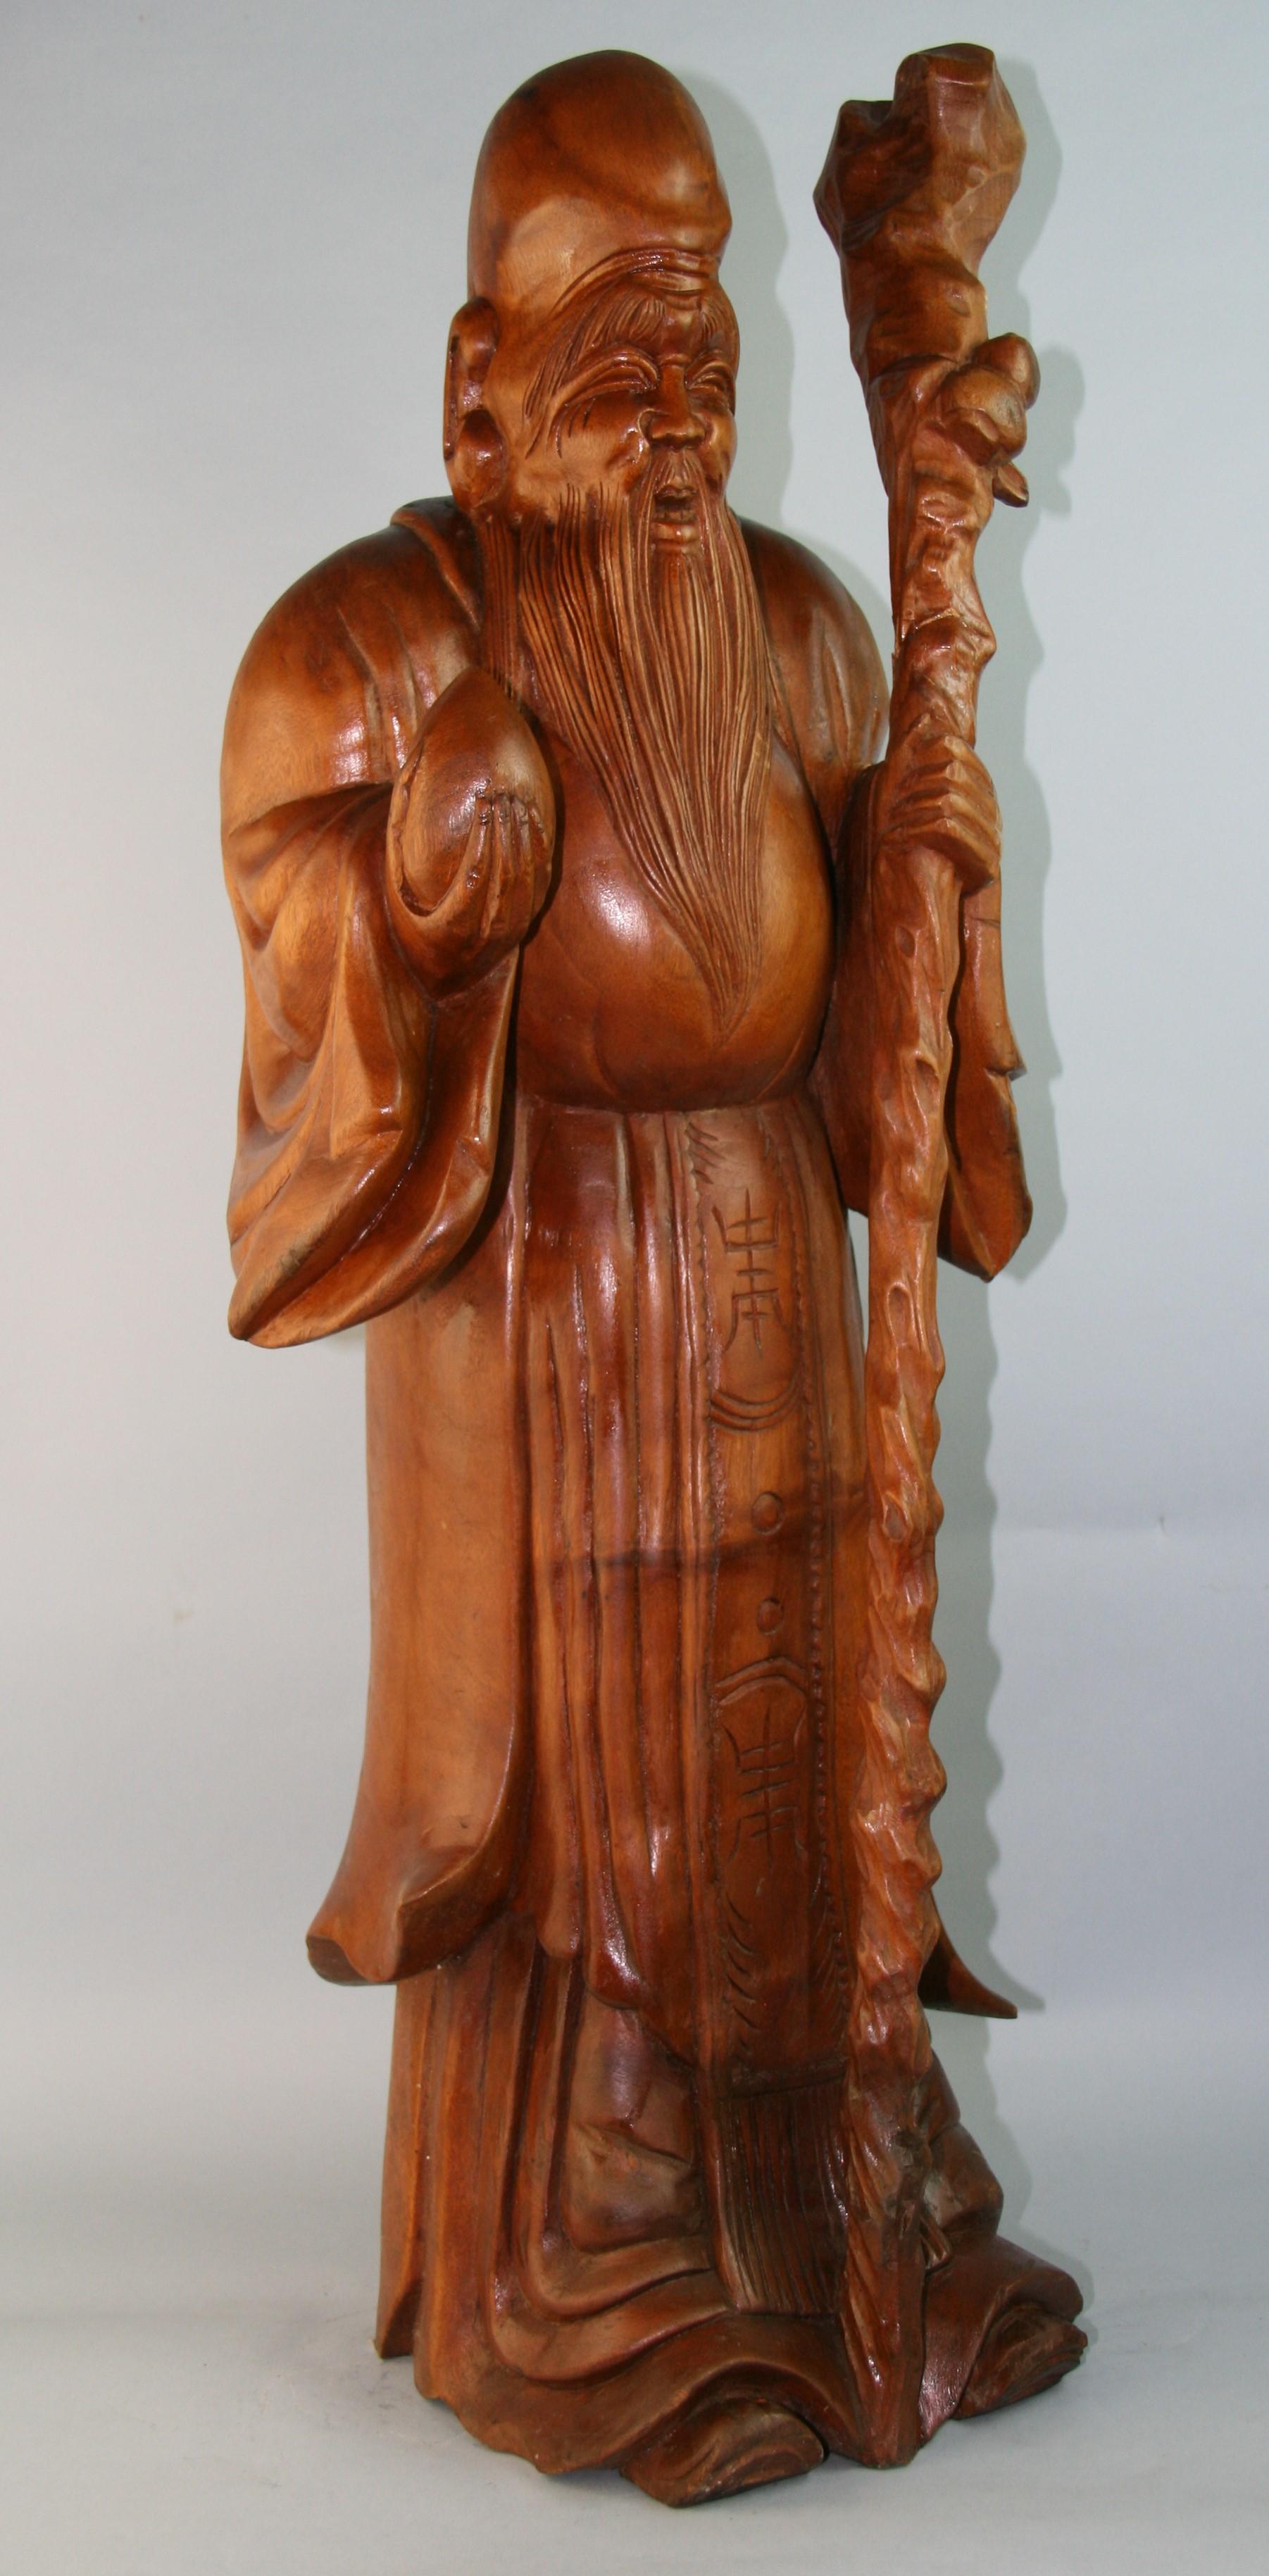 1157 Oversized hand carved statue of Okimono of Jurojin (godof langevity)
a symbol of long life carved from a solid block of boxwood.